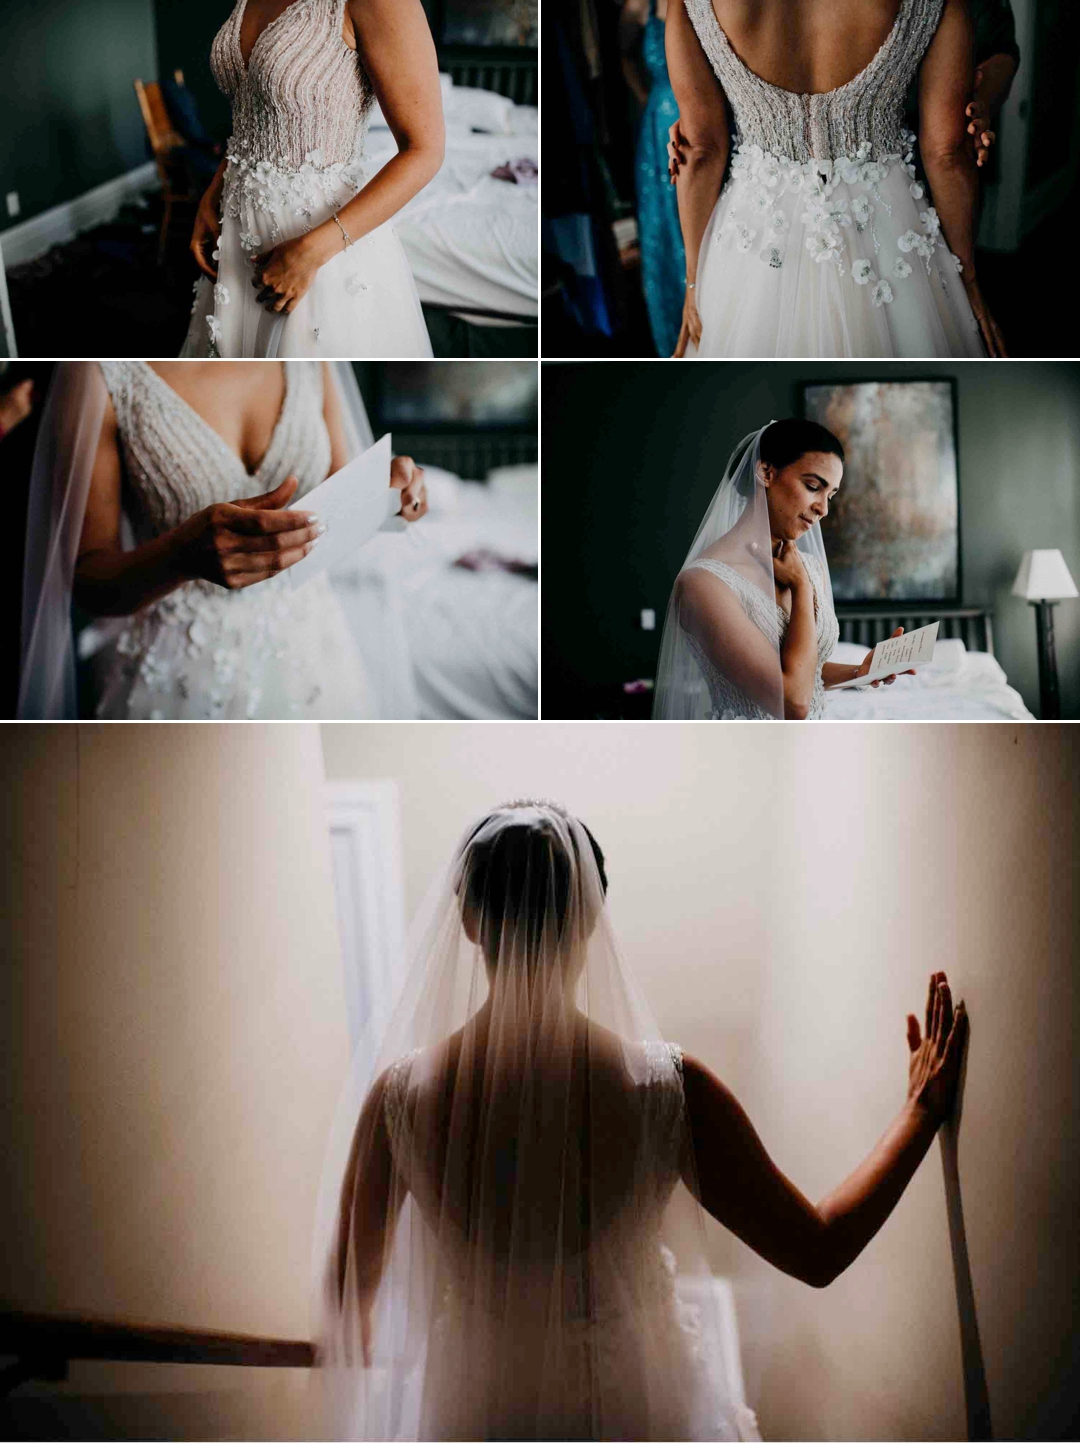 A collage of images of a bride reading a letter from a groom on the morning before her wedding ceremony